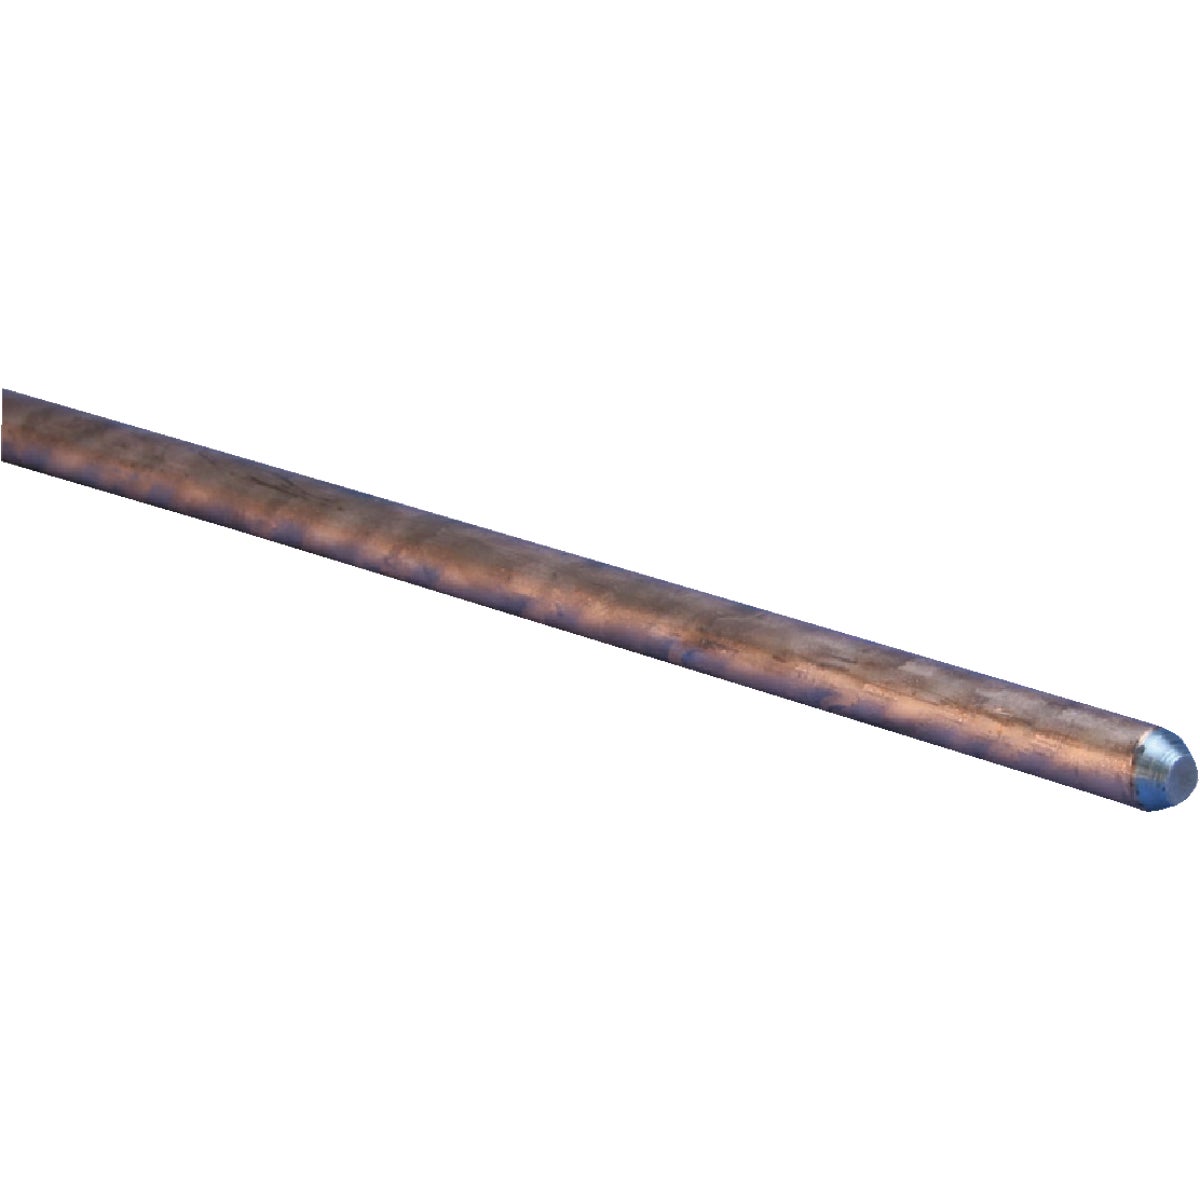 Item 534153, Steel core copper bonded ground rods. Features 99.